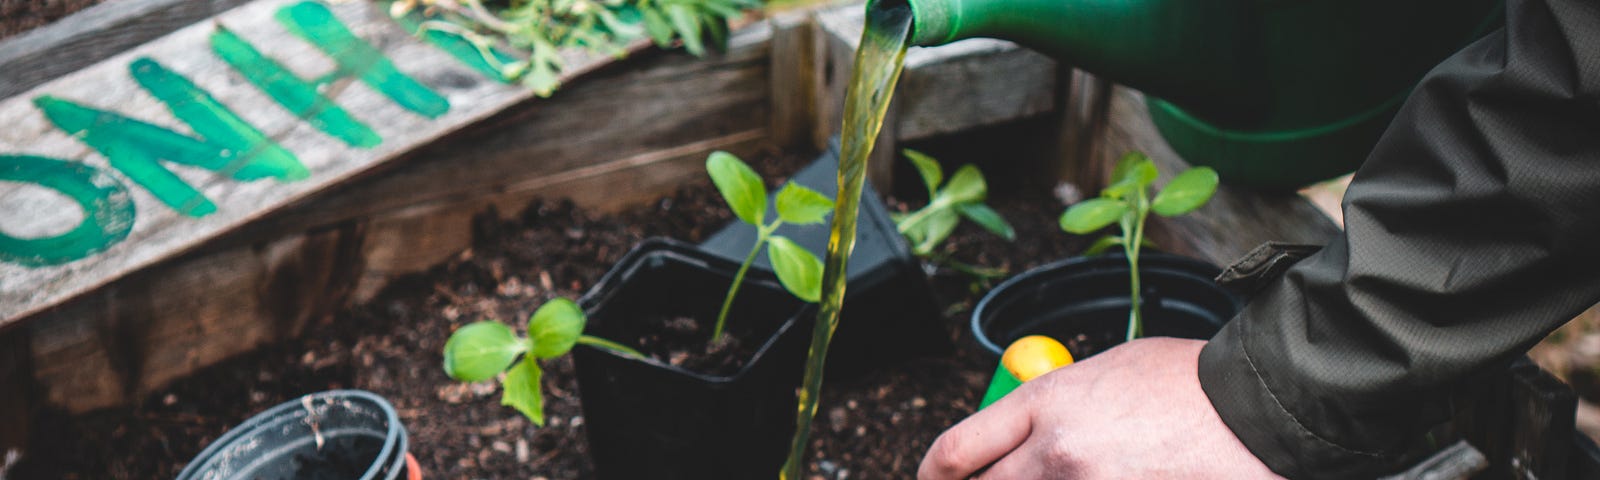 A person is digging a trowel into a fresh garden bed. The soil is rich and dark, and there are potted seedlings ready to transplant into the new earth. They are pouring liquid plant food into the ground to make it ready for the young plants.